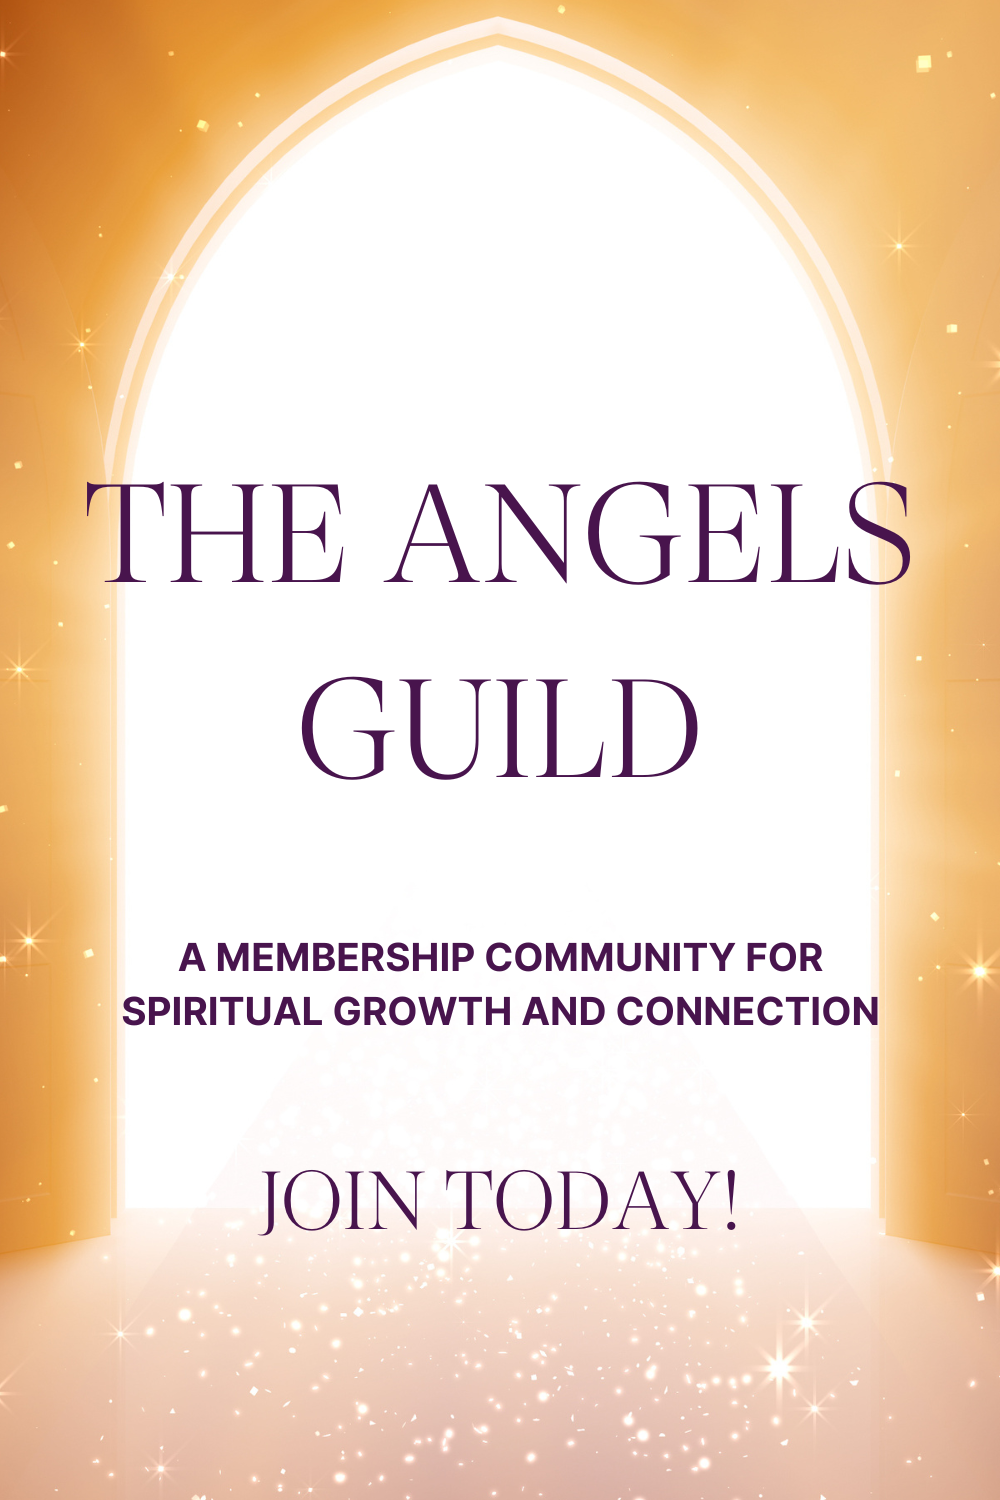 What is the Angel Guild?